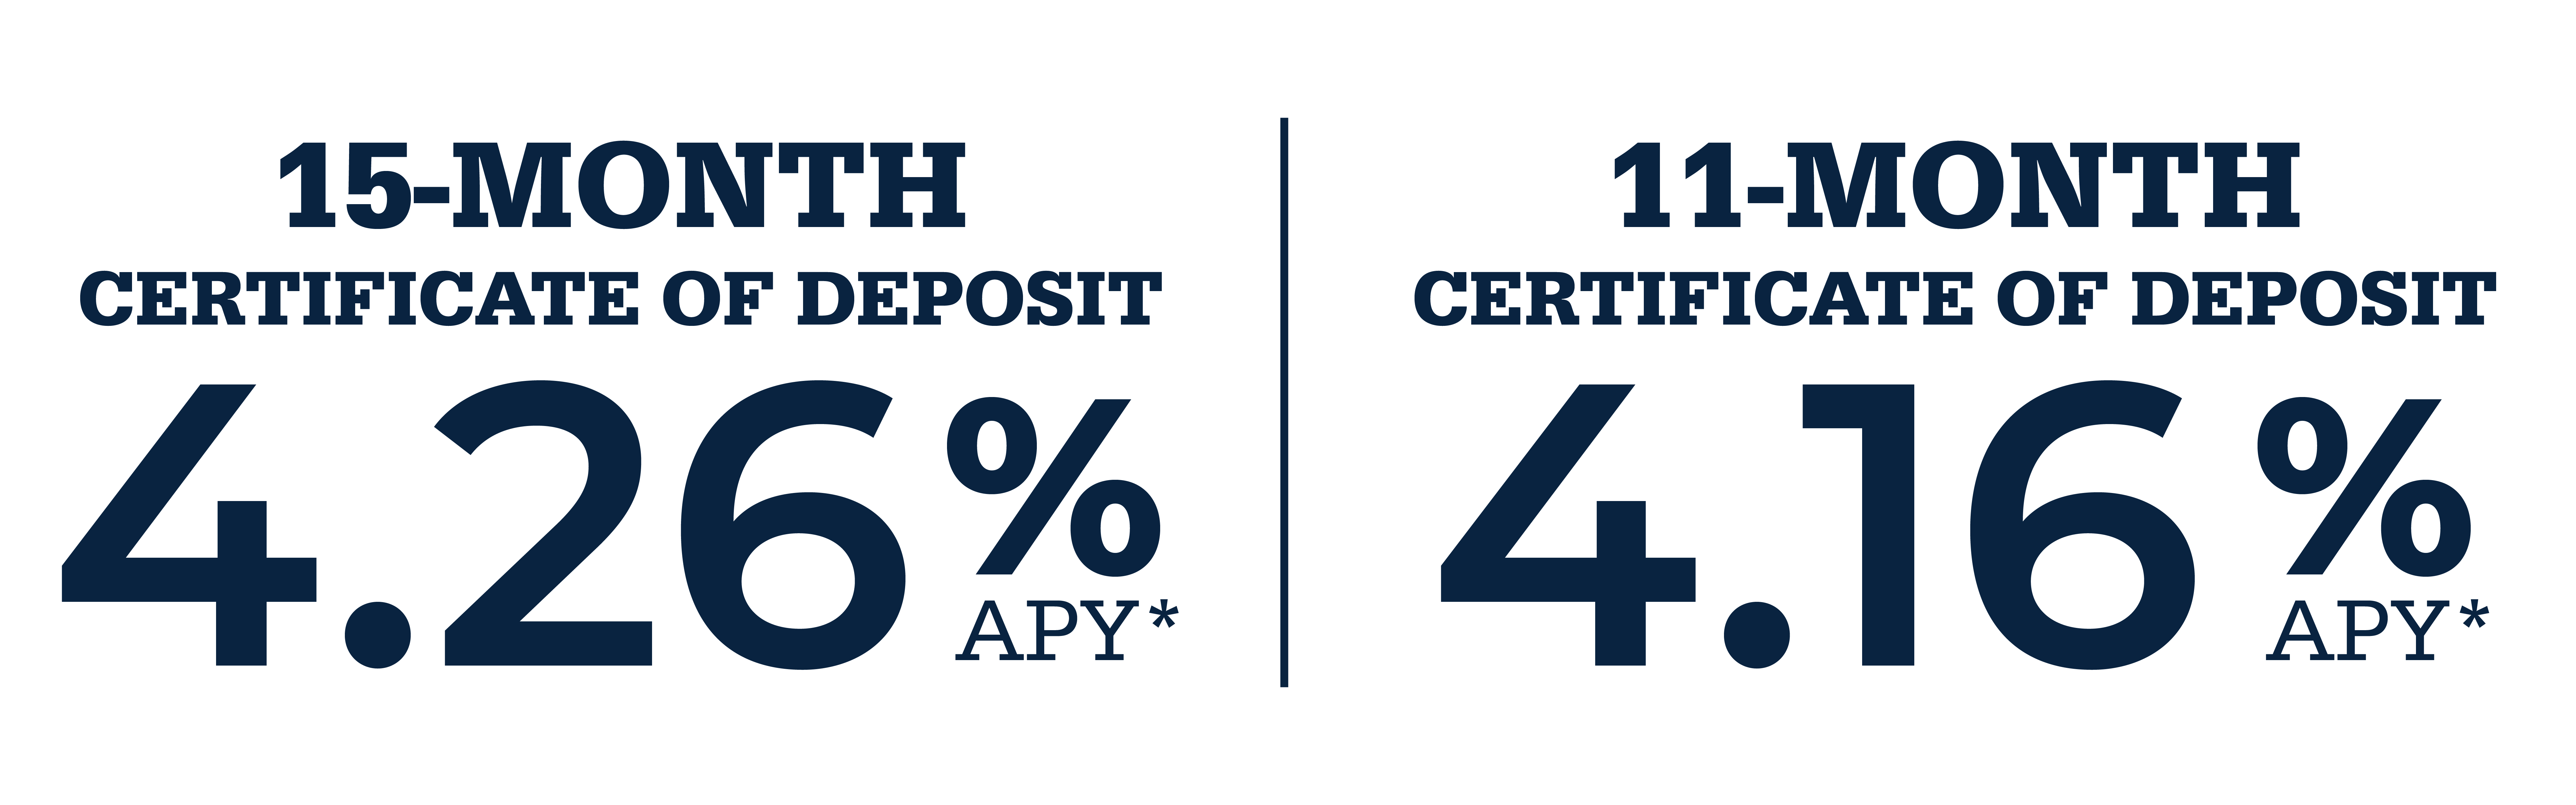 15-month Certificate of Deposit 4.26% APY* | 11-month Certificate of Deposit 4.16% APY*